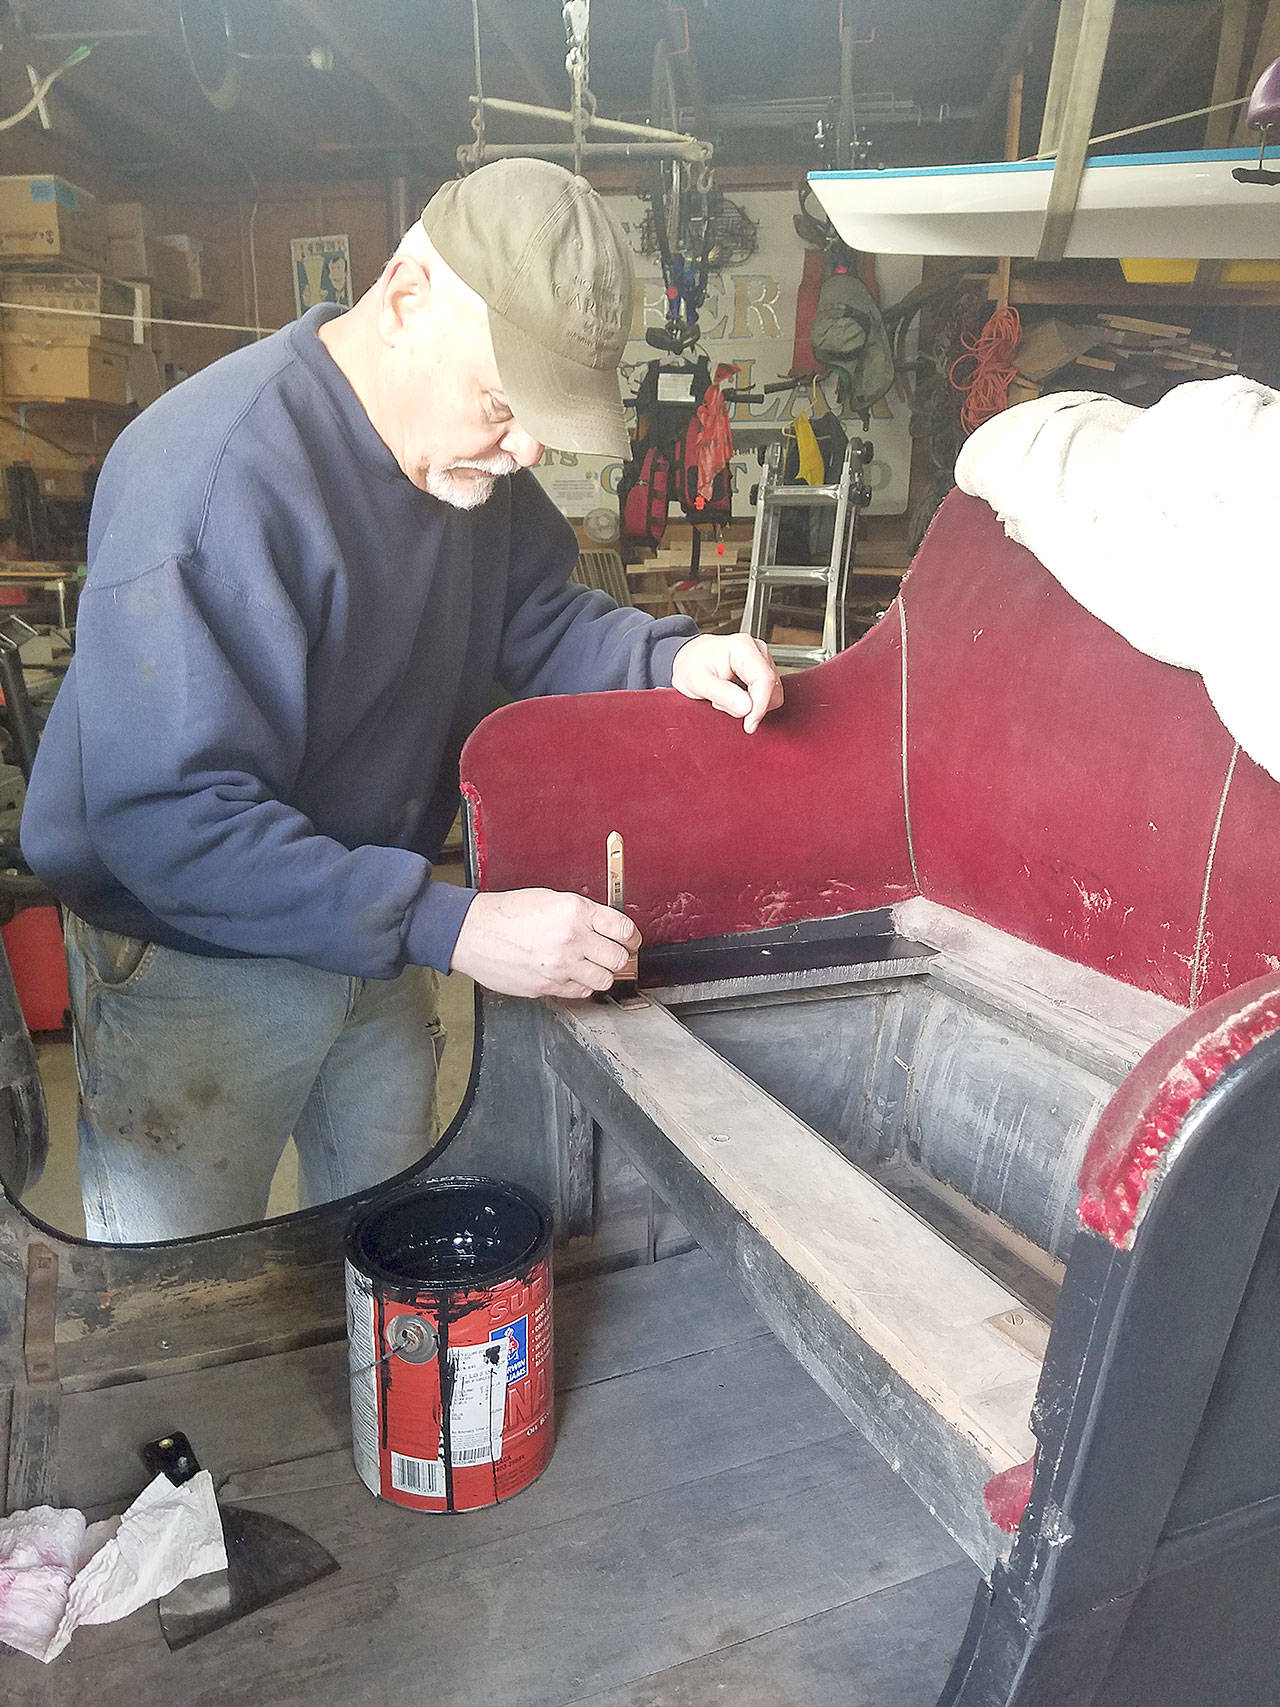 While he has time he hadn’t planned on, Jerry Bowman is in his shop restoring a circa-1880s sleigh. (Courtesy Photo)